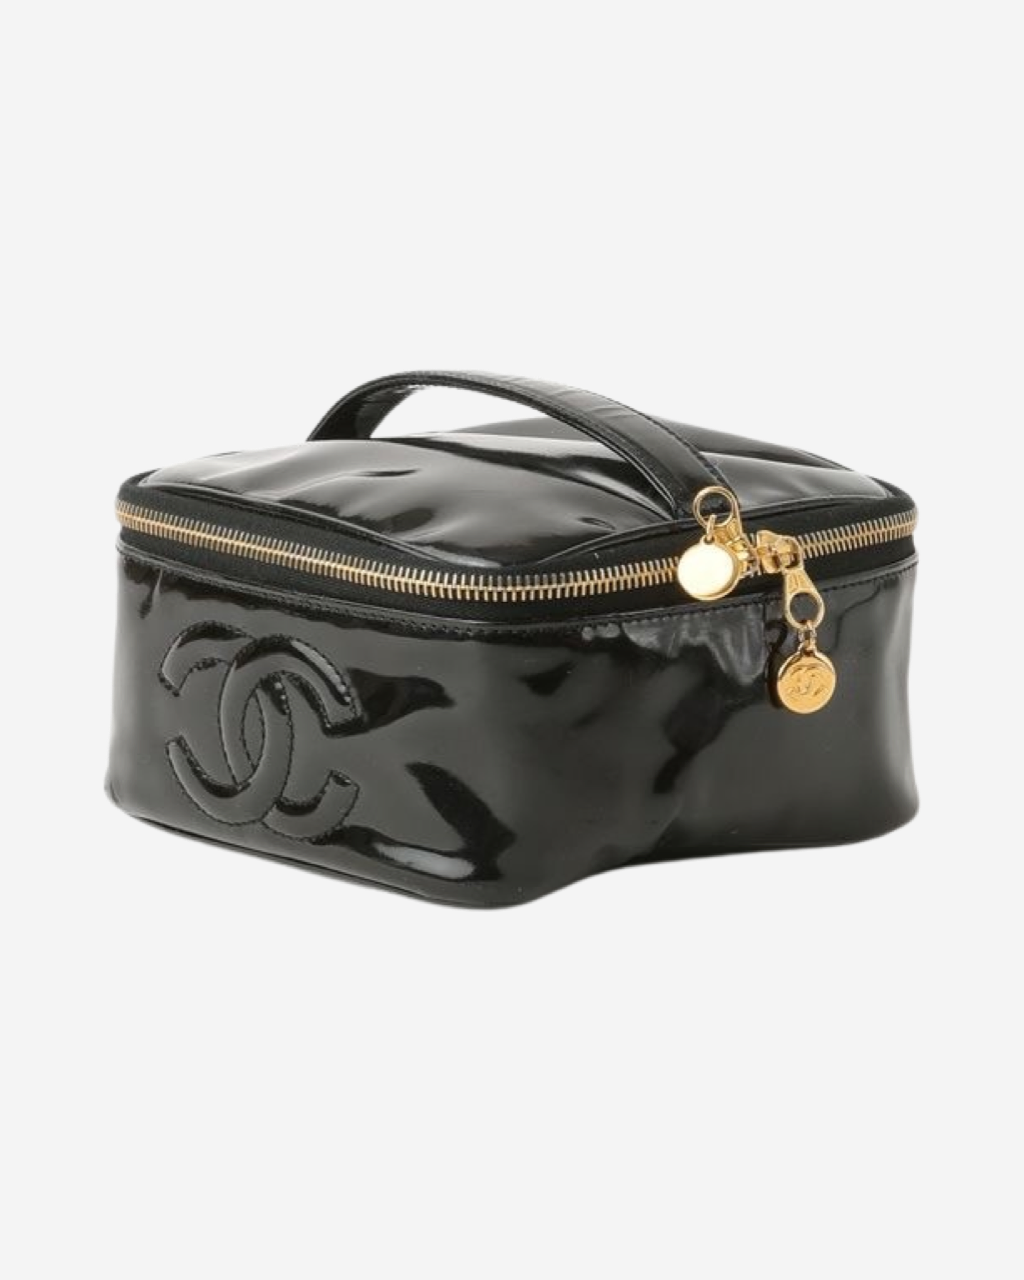 Chanel Vanity Case Patent Leather Bag